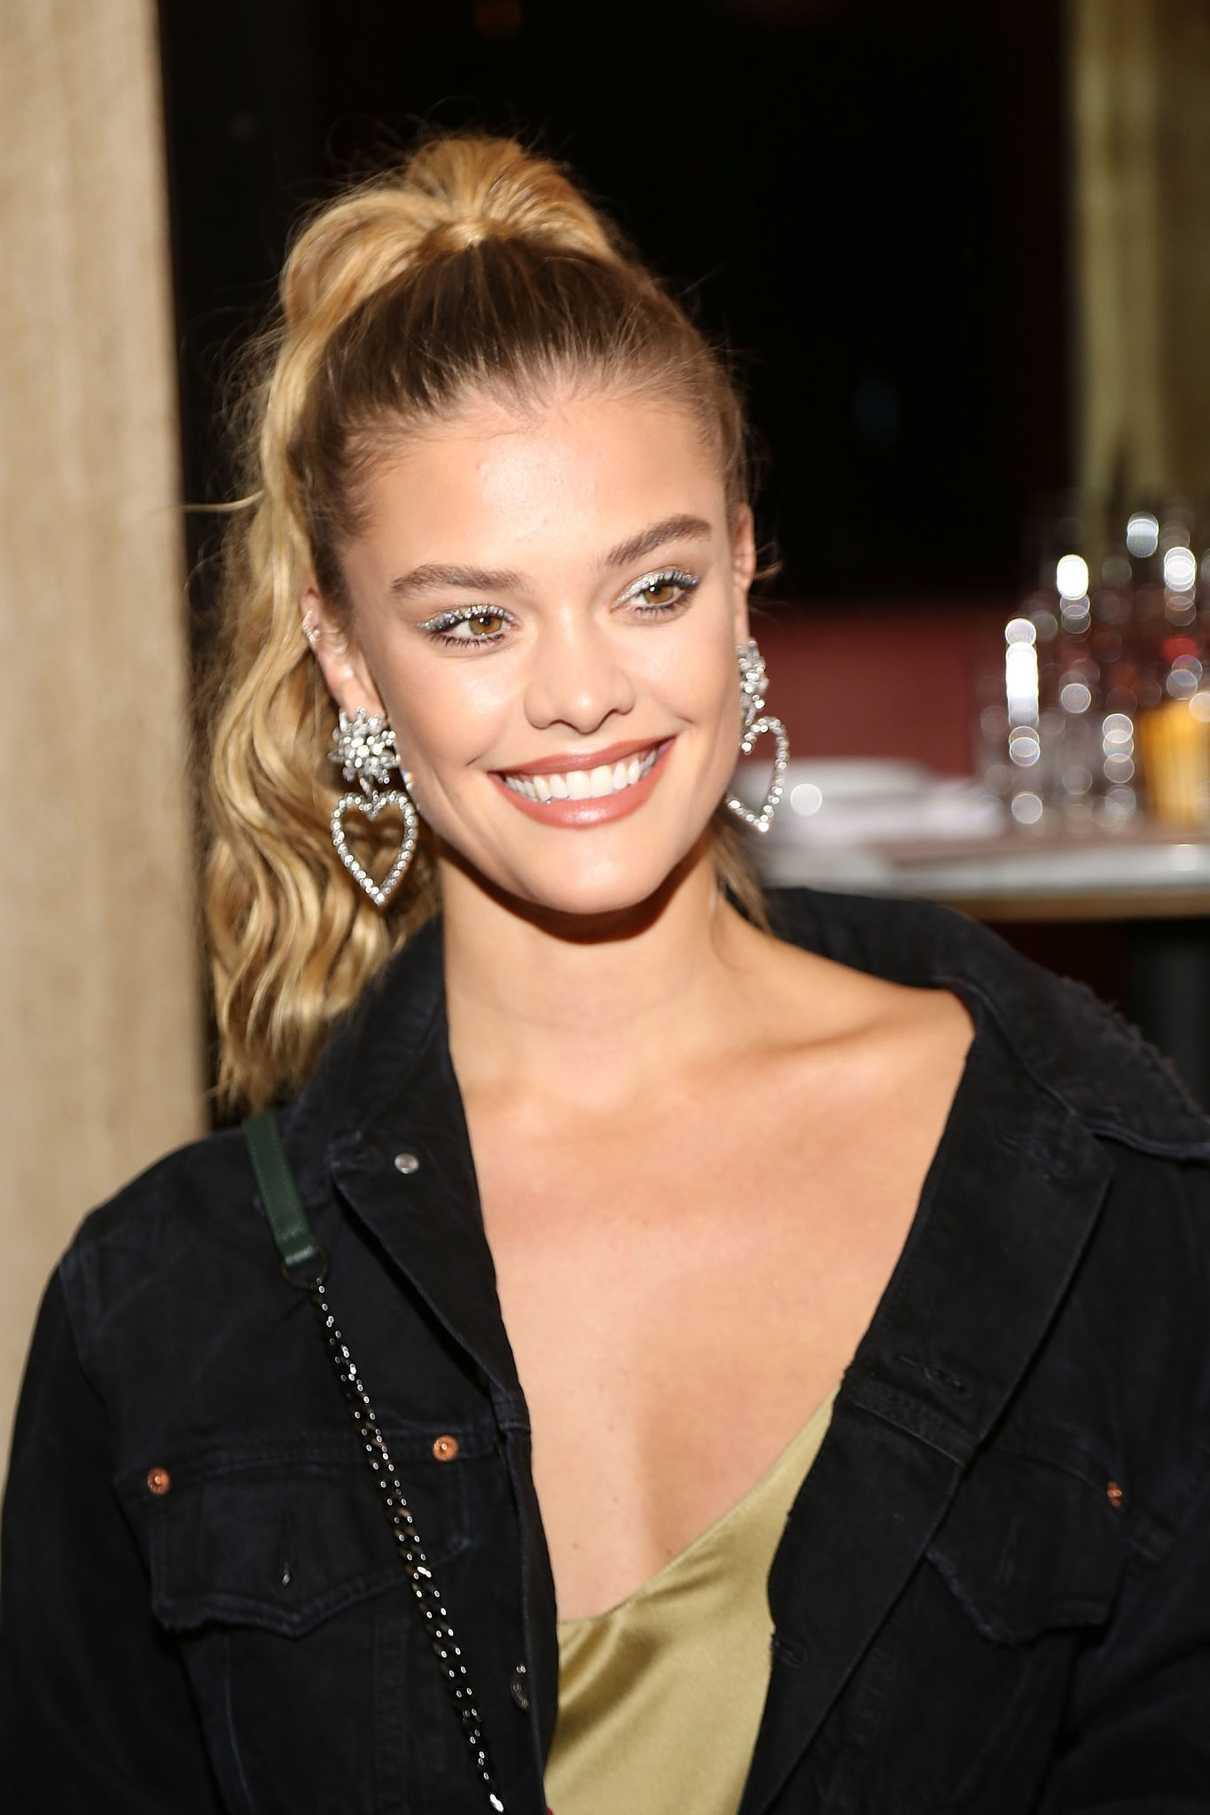 Nina Agdal Attends the Celebration of the 10 Year Anniversary of ...